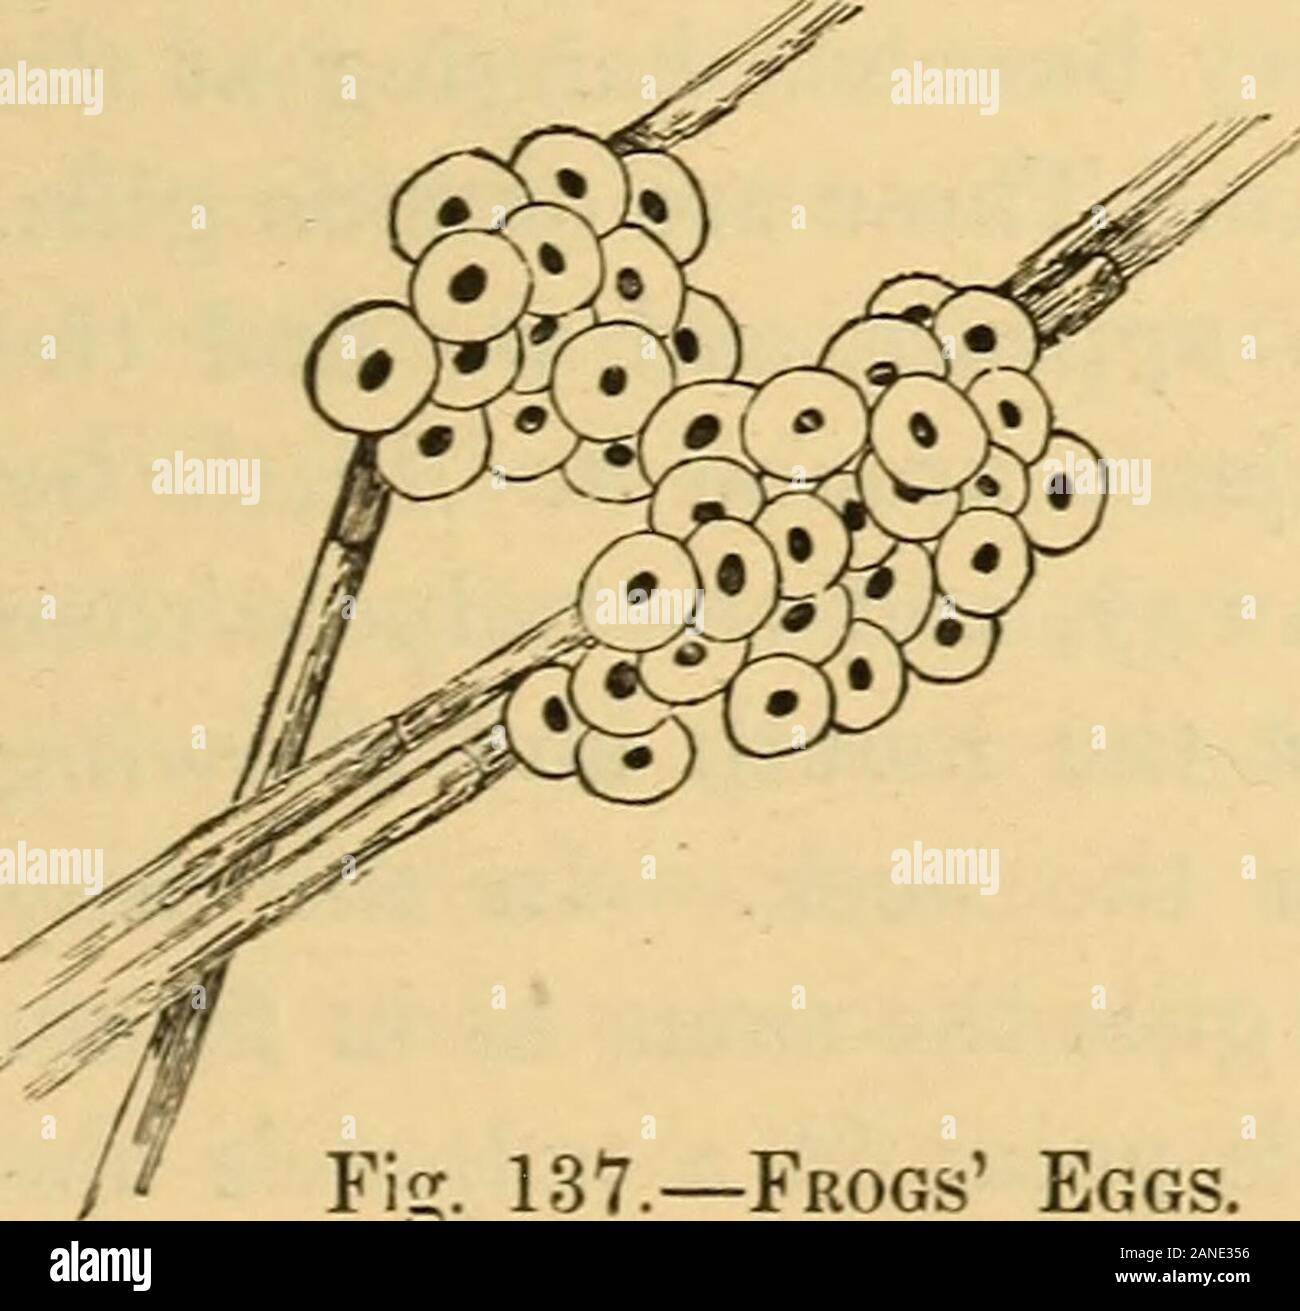 Animal Life In The Sea And On The Land Fig 136 The Frog Fis 137 Frogs Eggs This Mass Is Calledspawn And It Ismostly Attached To Sticksor Grass In The Waternear Shore Fig